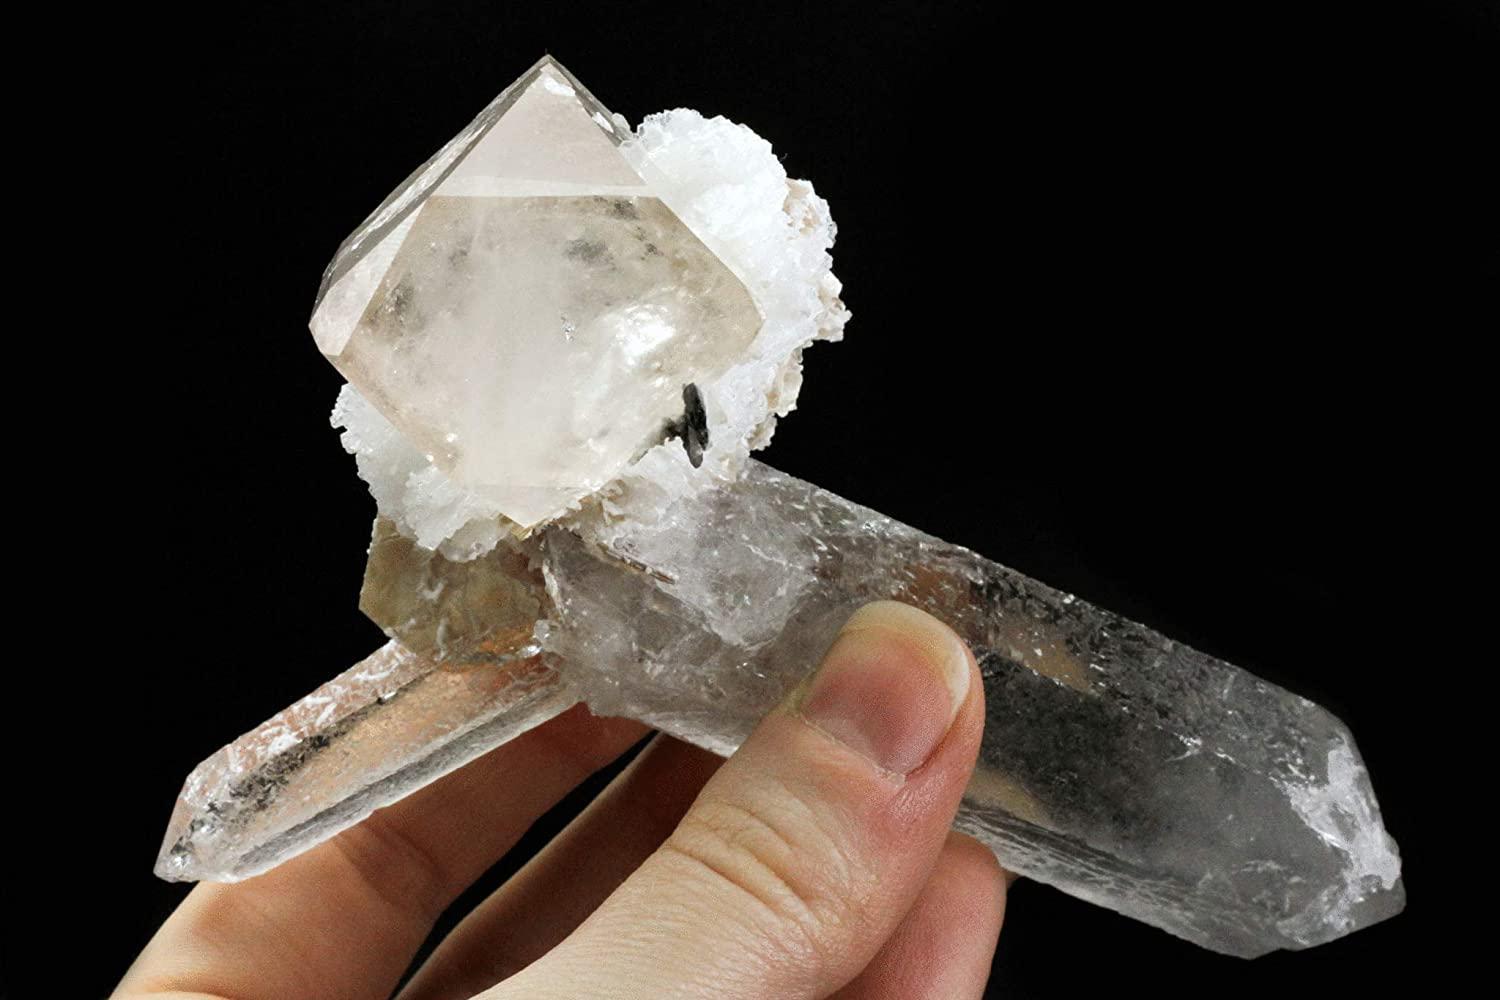 From Dassu, Braldu Valley, Skardu District, Baltistan, Gilgit-Baltistan, Pakistan

Large gem translucent topaz crystal with muscovite and albite perched on top 2 intersecting quartz crystals. The topaz has a faint champagne color with sharp